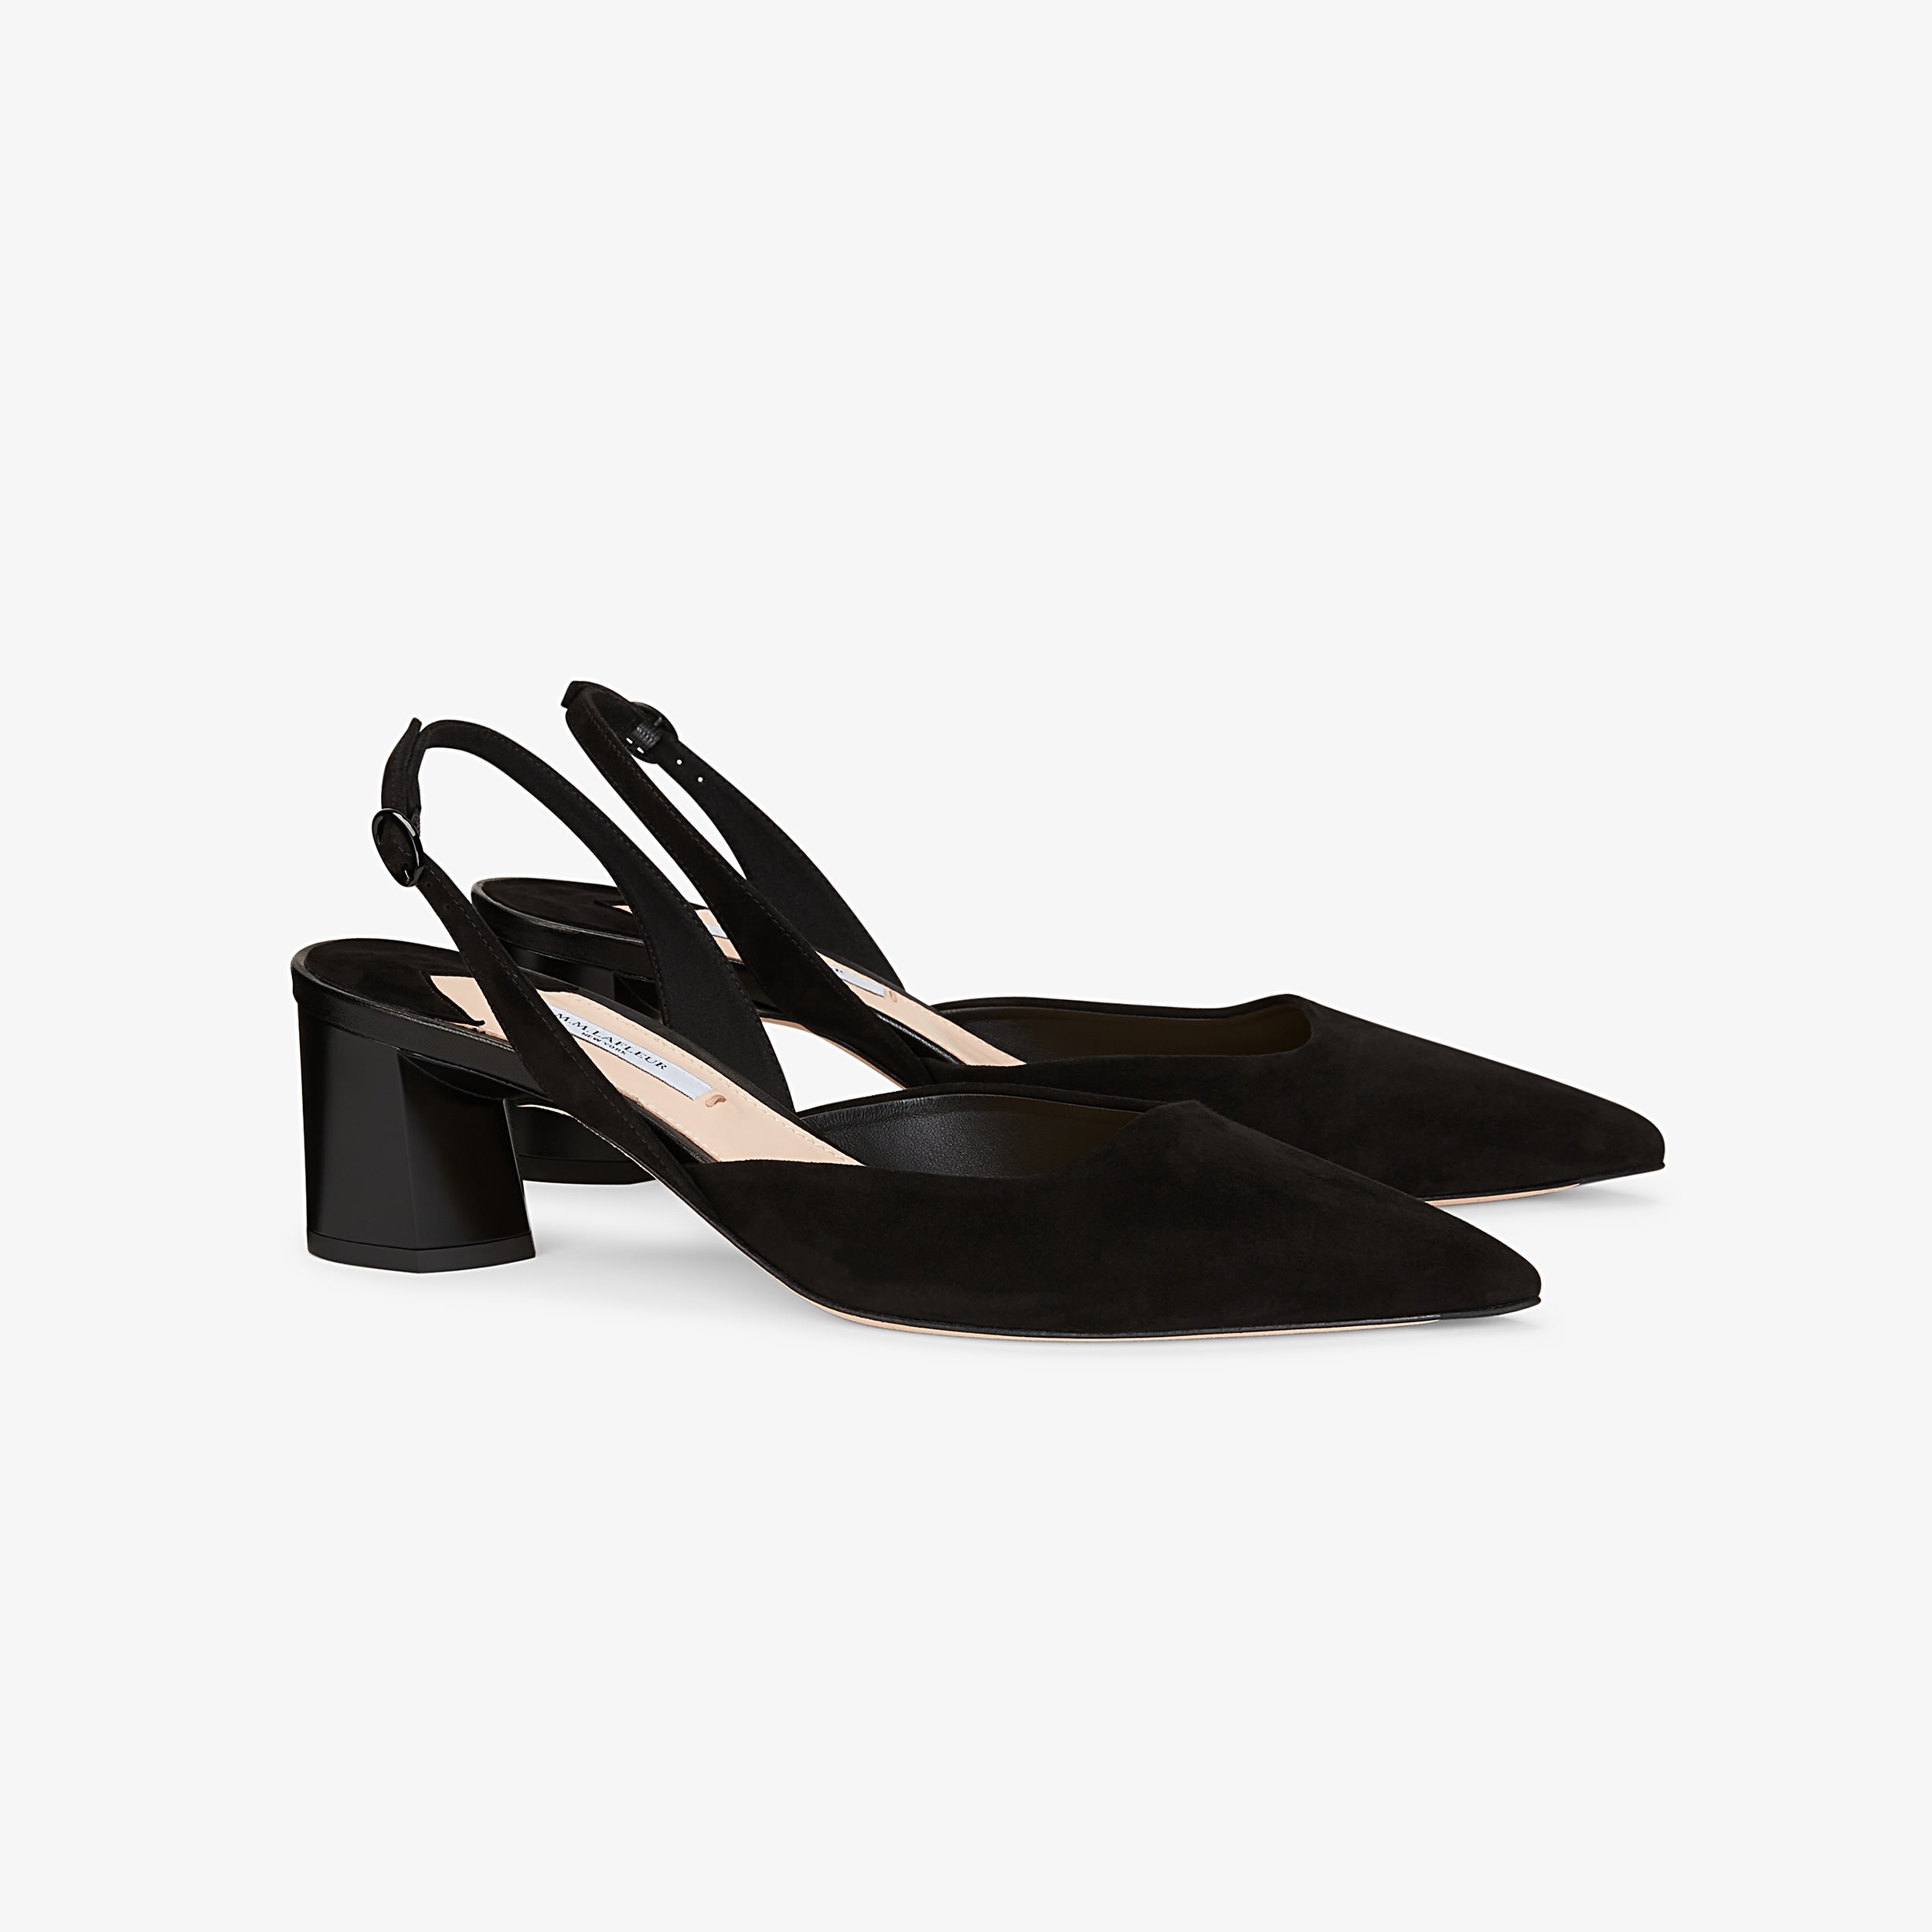 suede slingback shoes